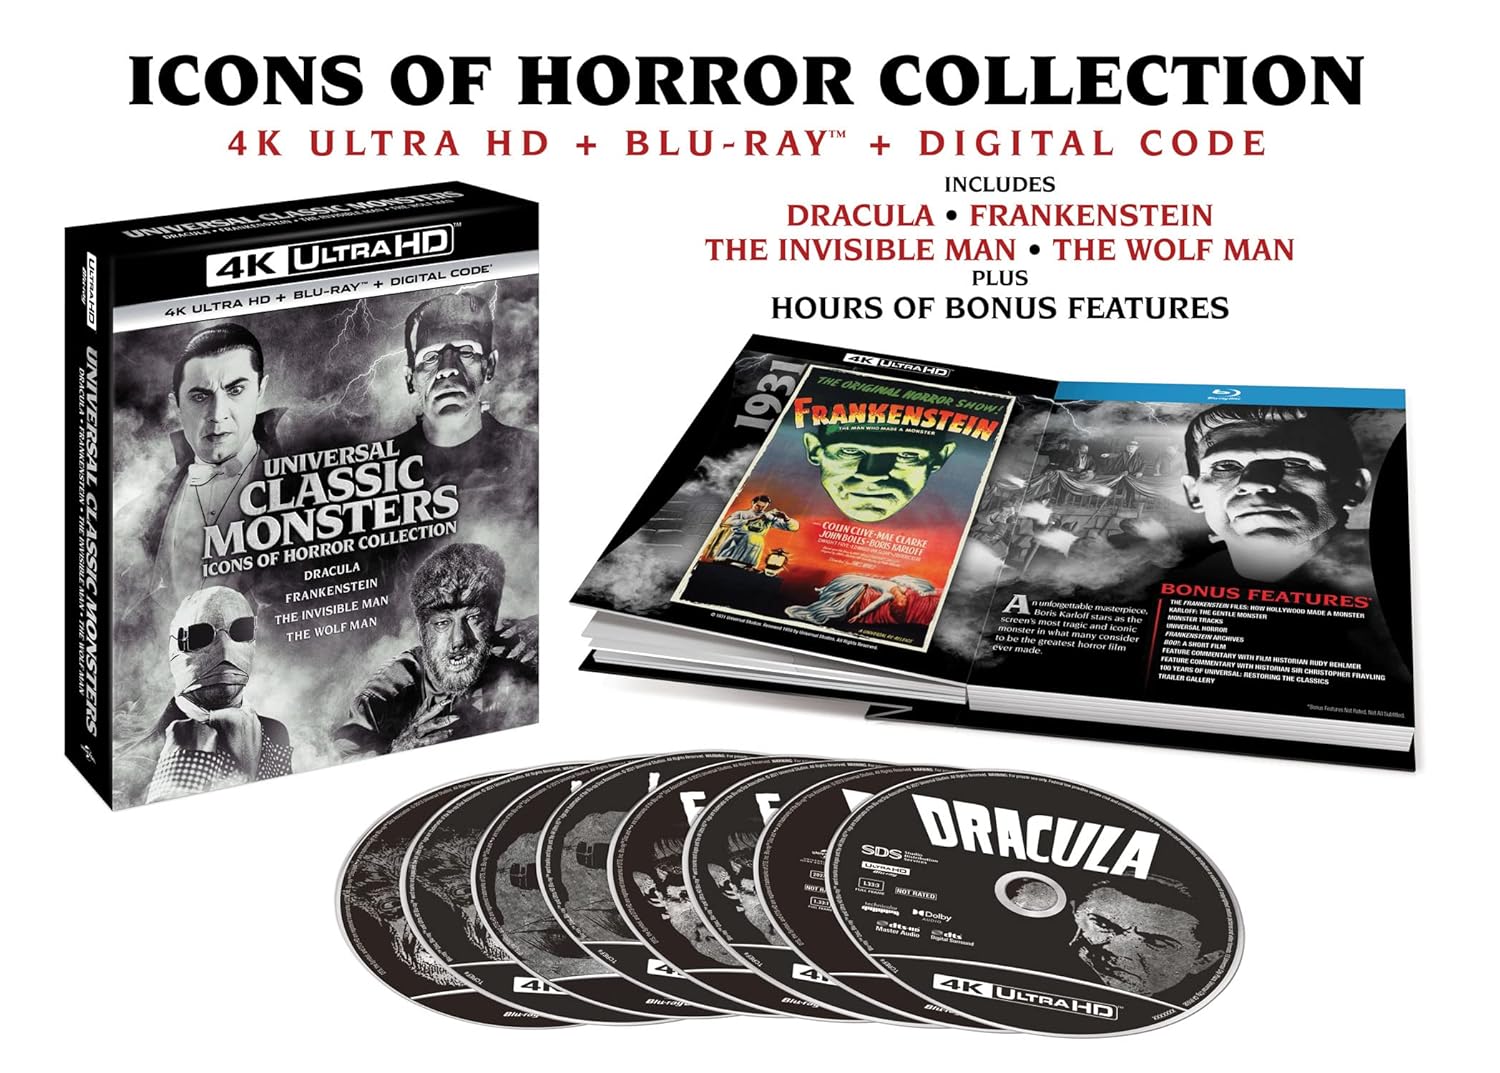 Universal Classic Monsters: Icons of Horror Collection 